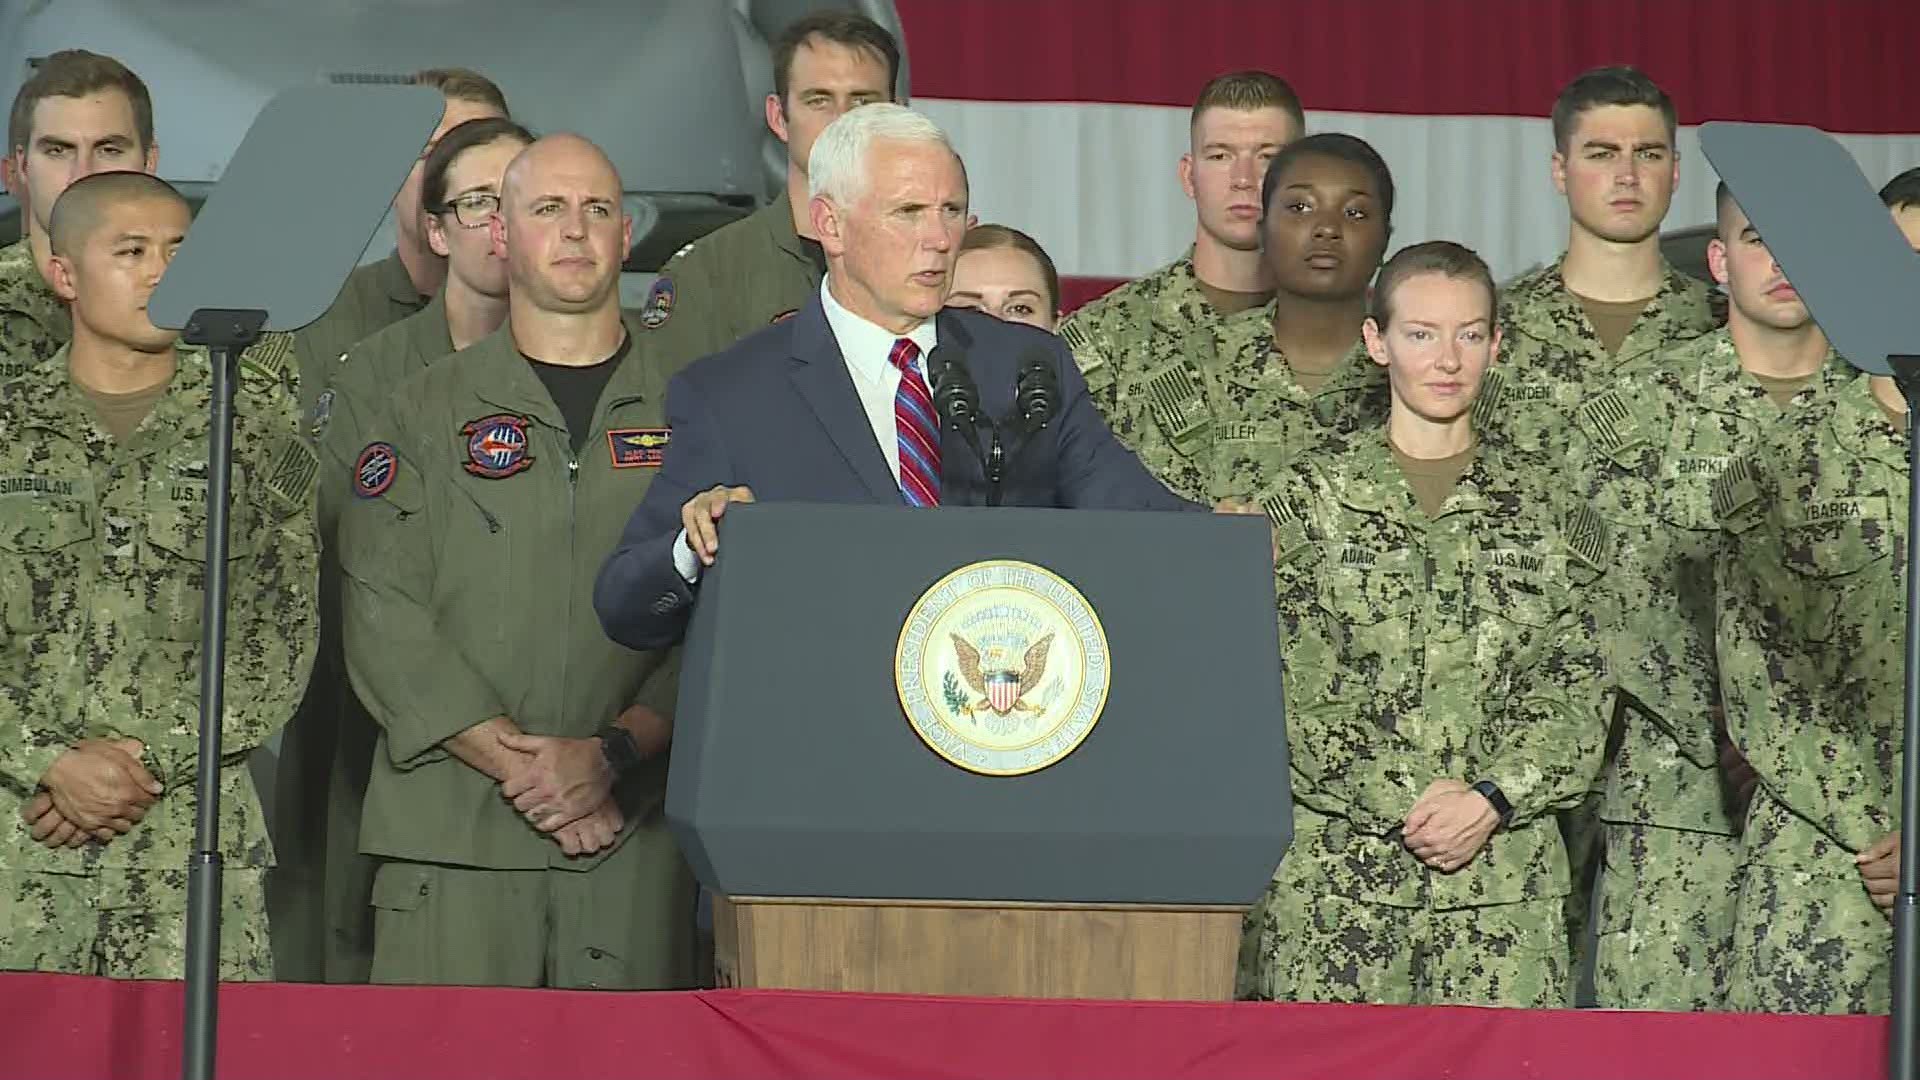 "Men and women of Naval Air Station Jacksonville, you have chosen to serve our country in a world that remains all too dangerous," Pence said. "We're counting on you. We know we can, and I promise you this Commander in Chief and this Vice President will always have your back."